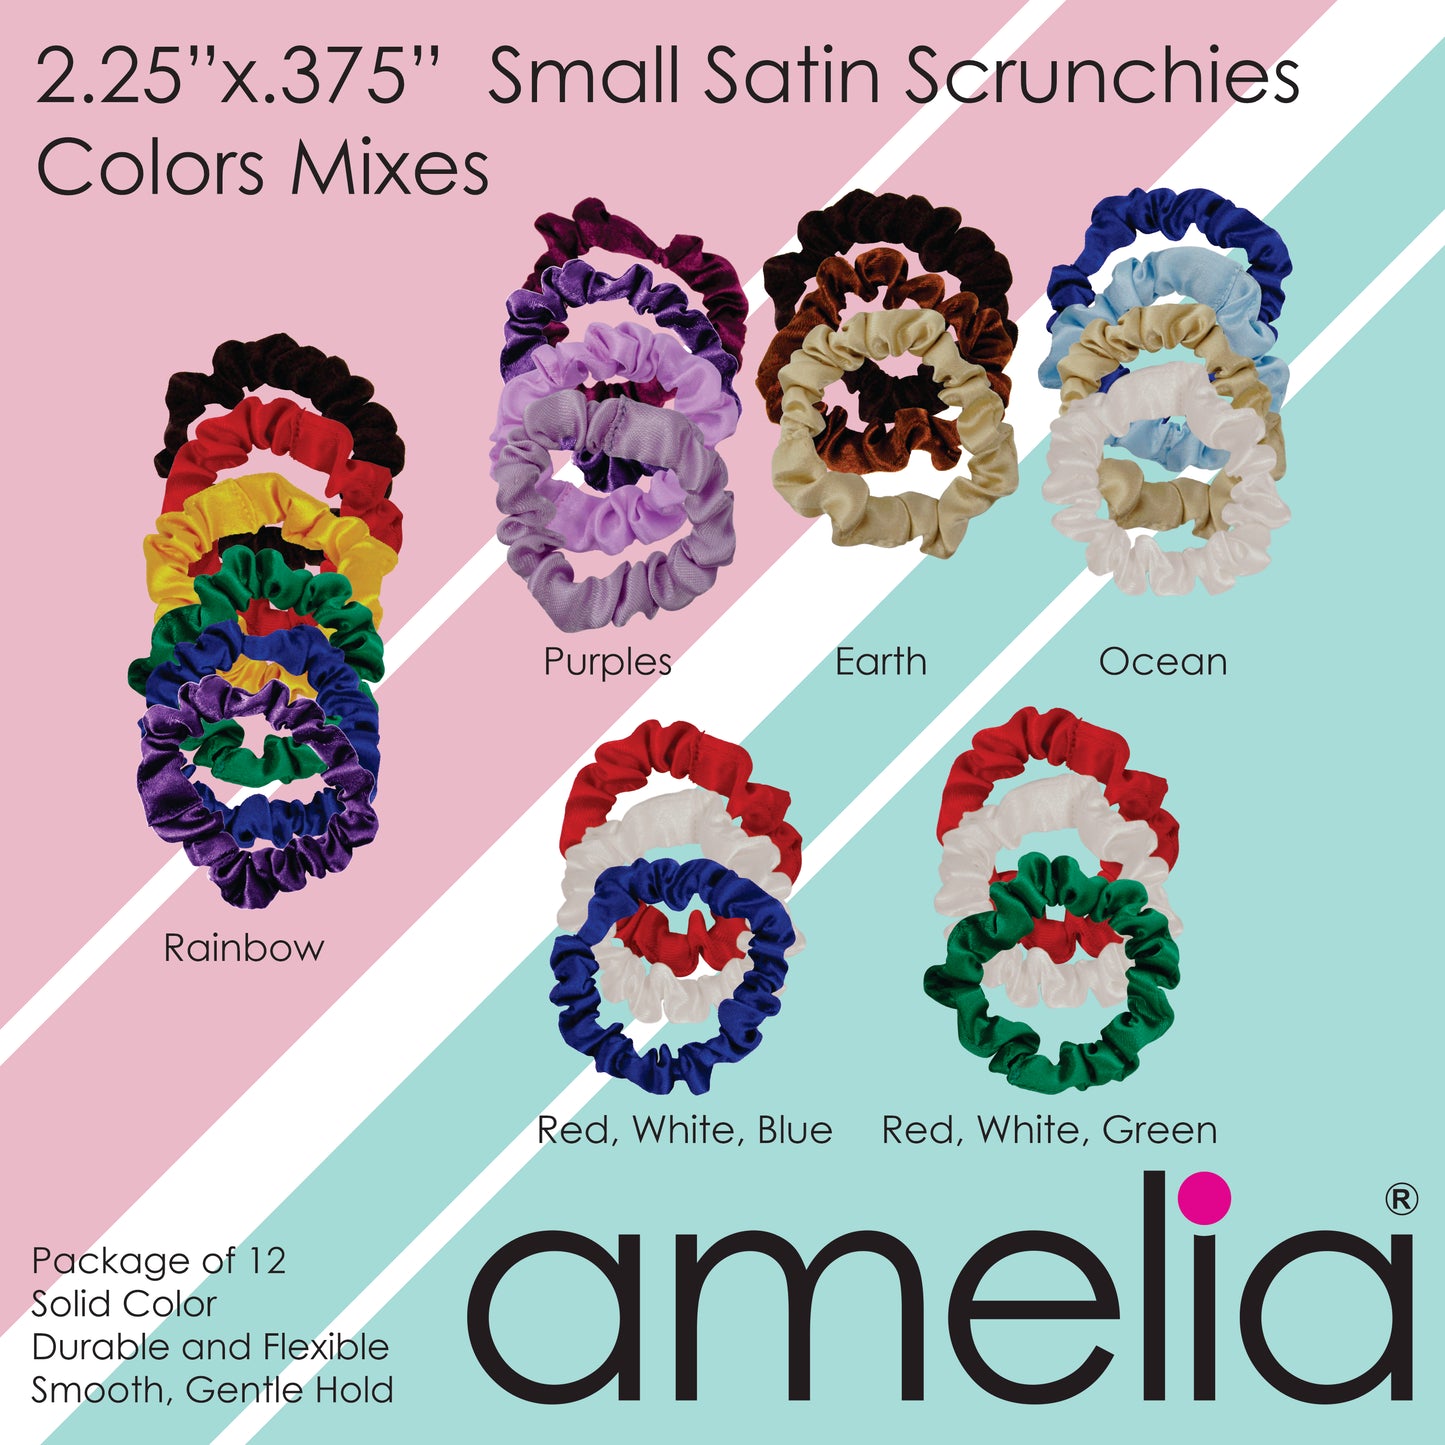 Amelia Beauty, White Satin Scrunchies, 2.25in Diameter, Gentle on Hair, Strong Hold, No Snag, No Dents or Creases. 12 Pack